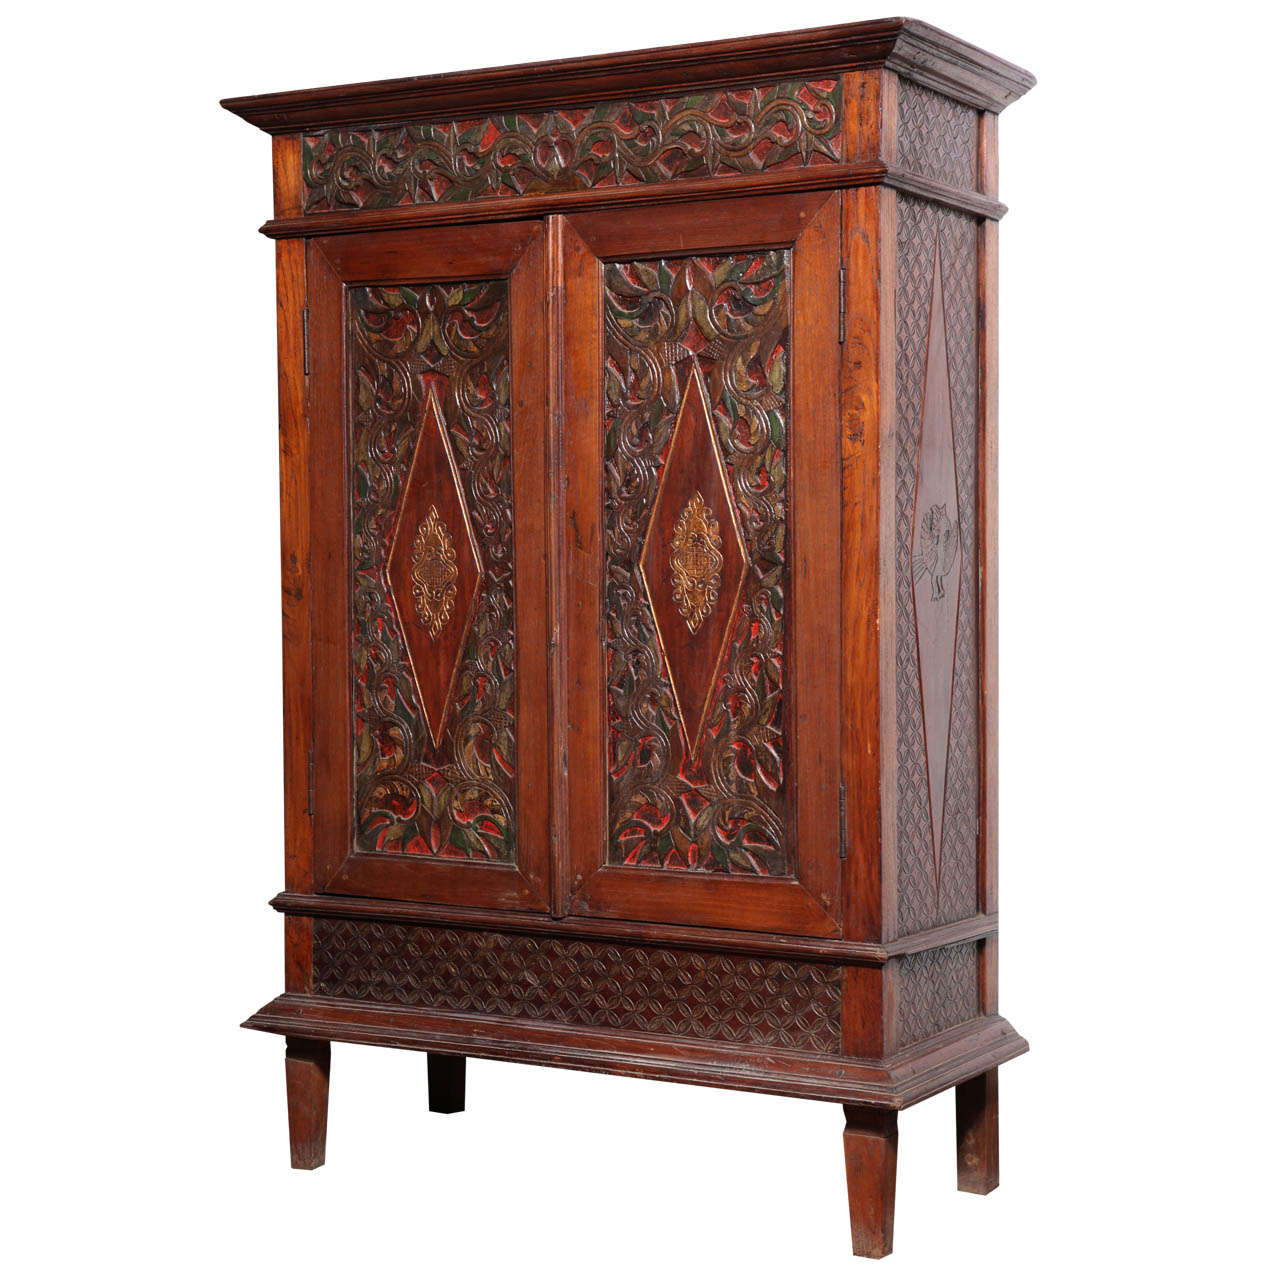 Antique Javanese Teakwood Cabinet with Detailed Carvings, Early 20th Century